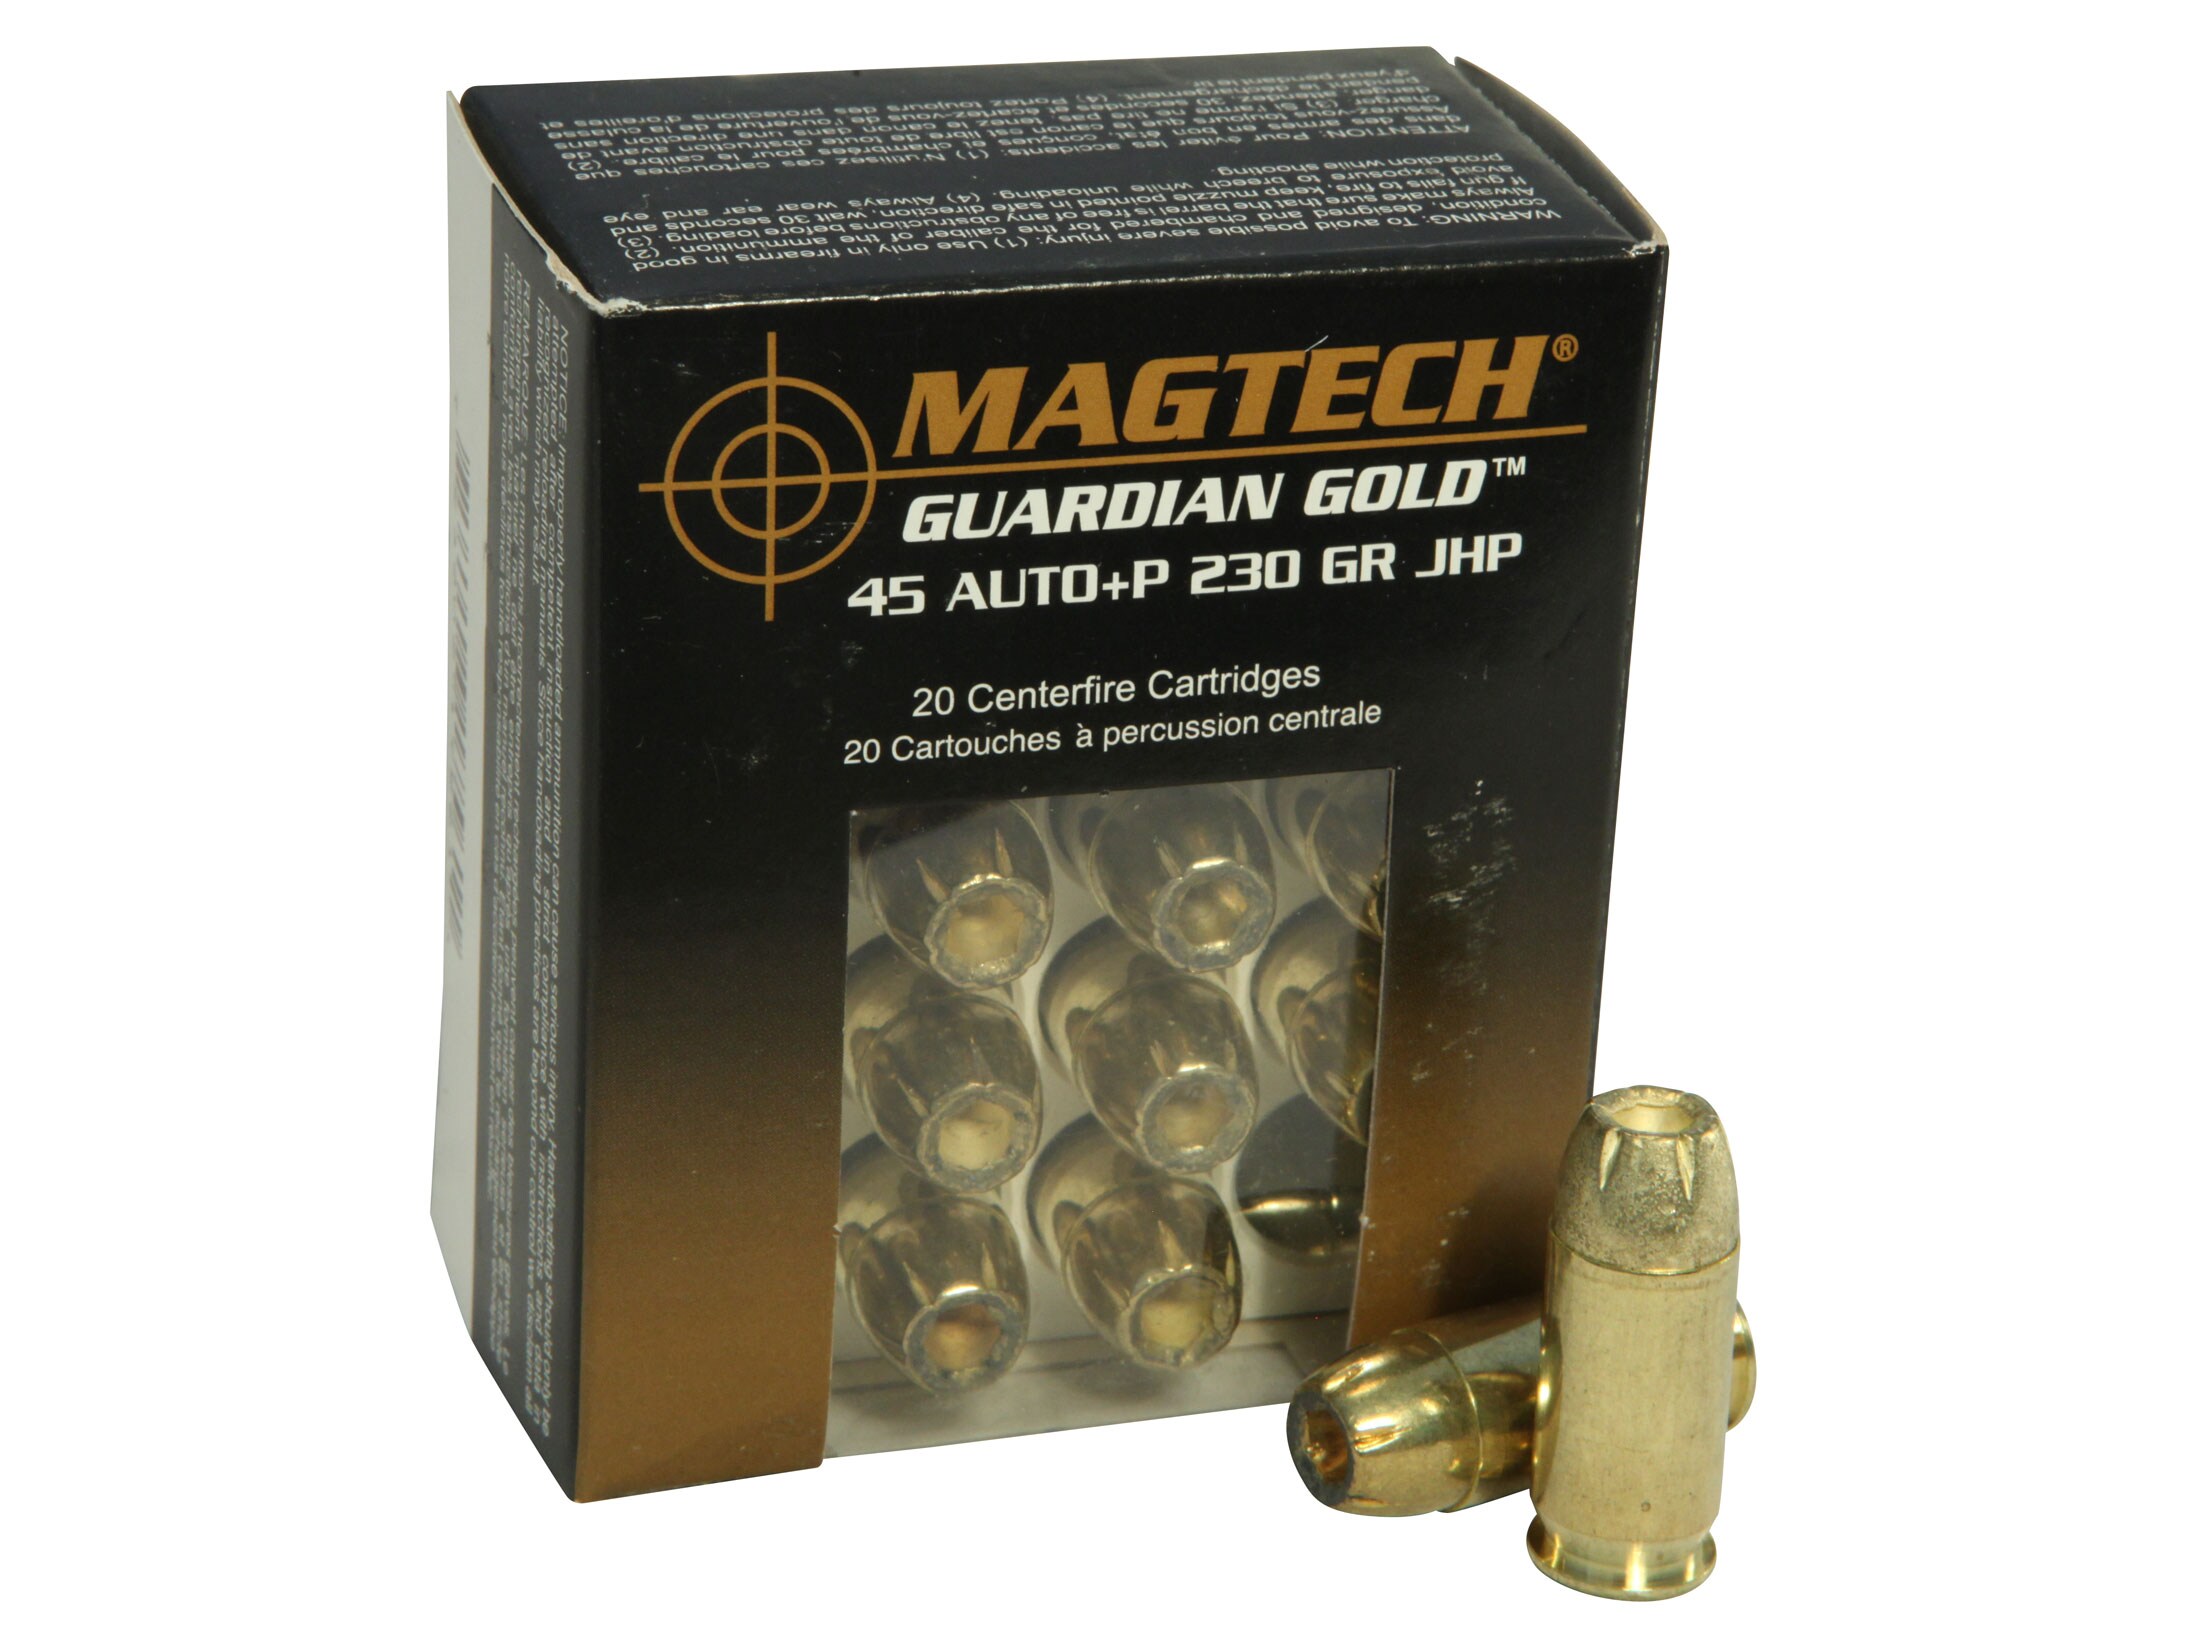 Magtech Guardian Gold Ammo 45 ACP +P 230 Grain Jacketed Hollow Point.